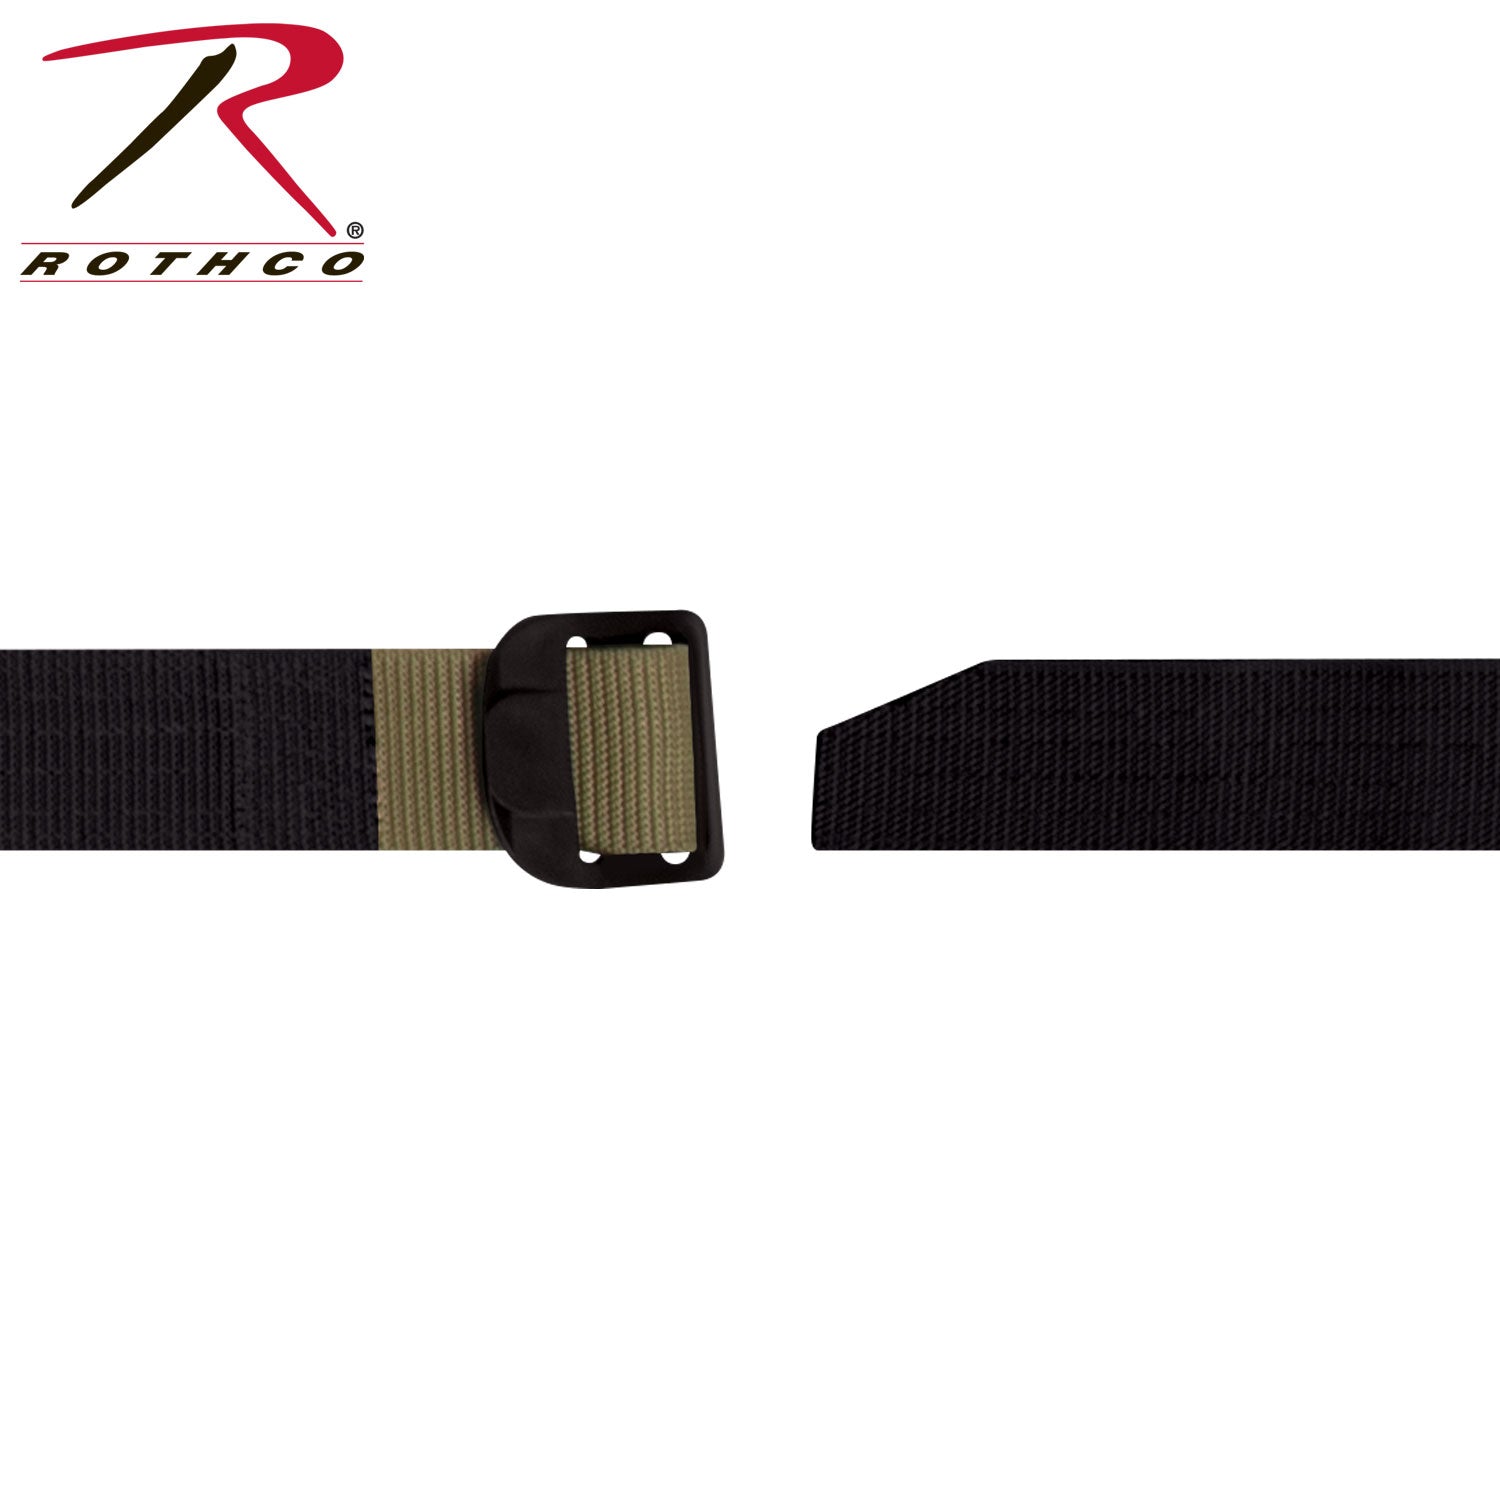 Rothco Reversible Airport Friendly Riggers Belt - Black / Coyote - Tactical Choice Plus